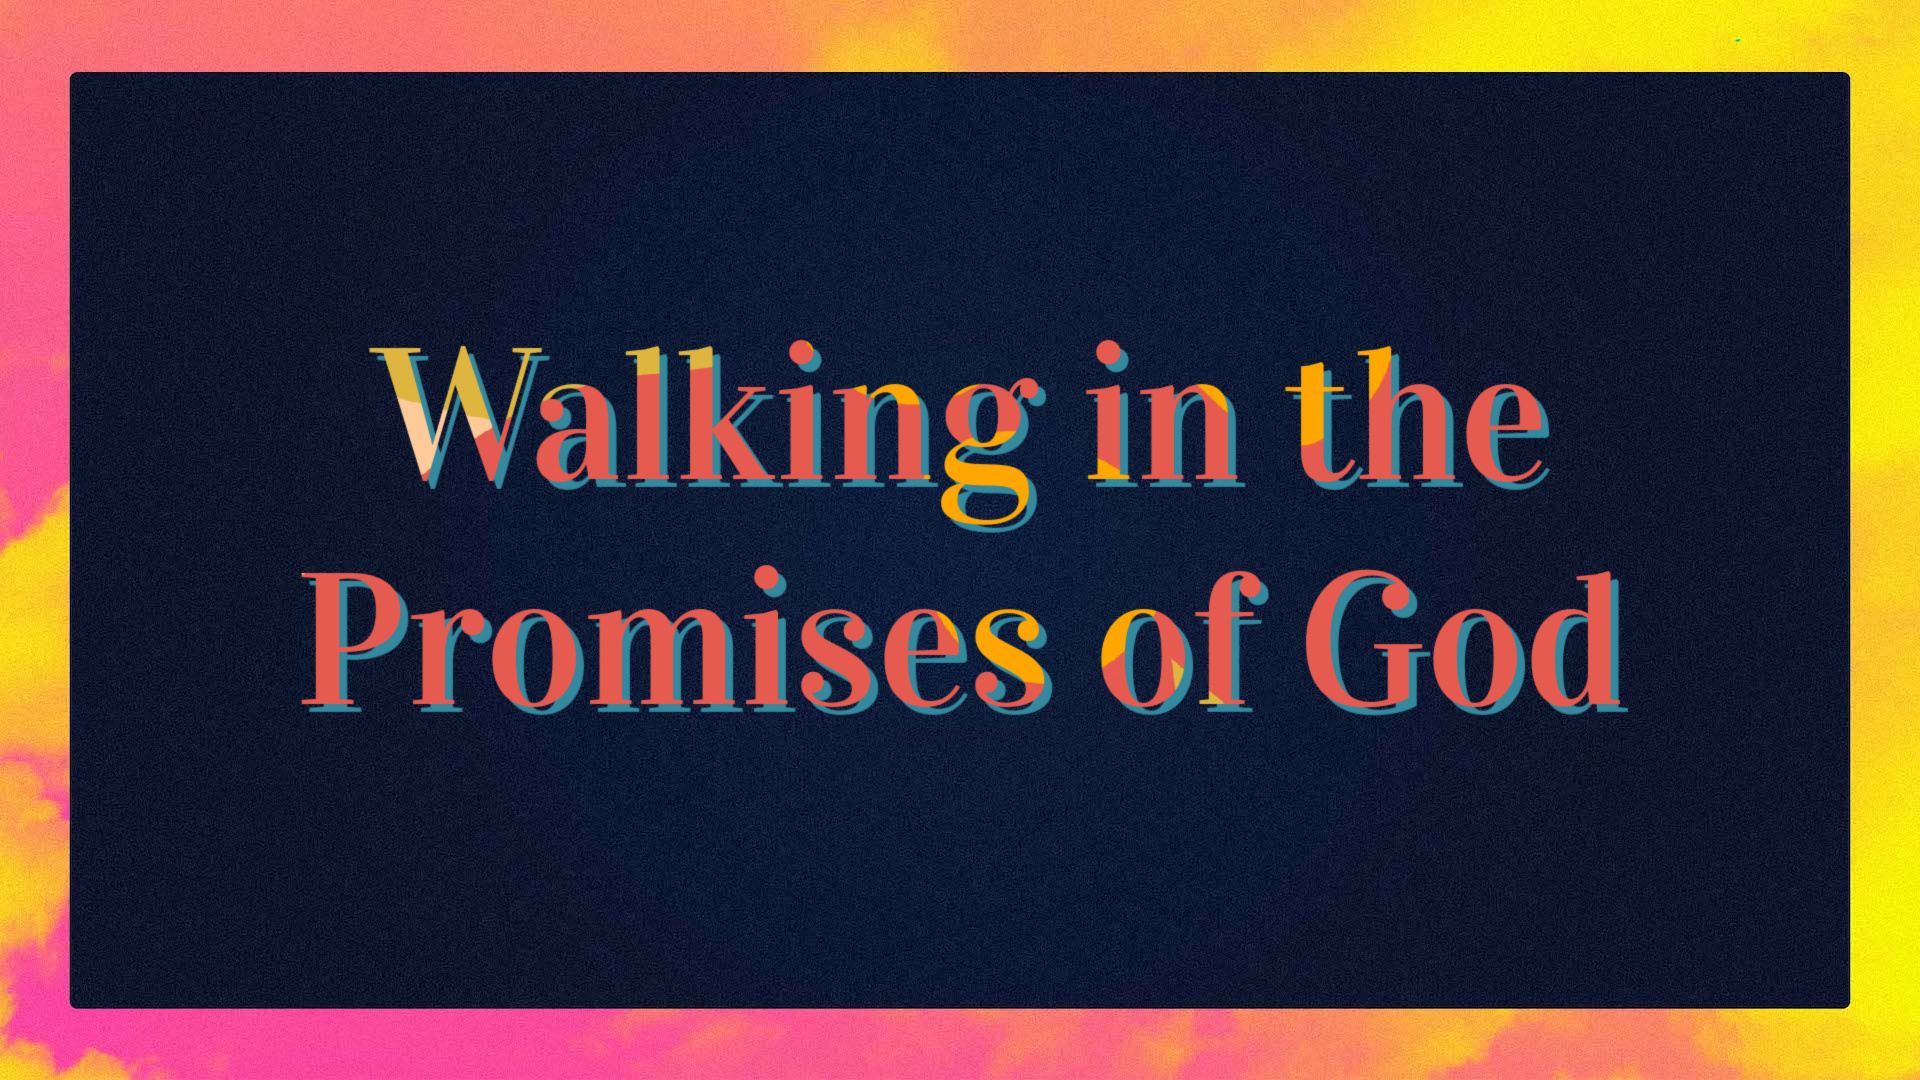 Walking in the Promises of God